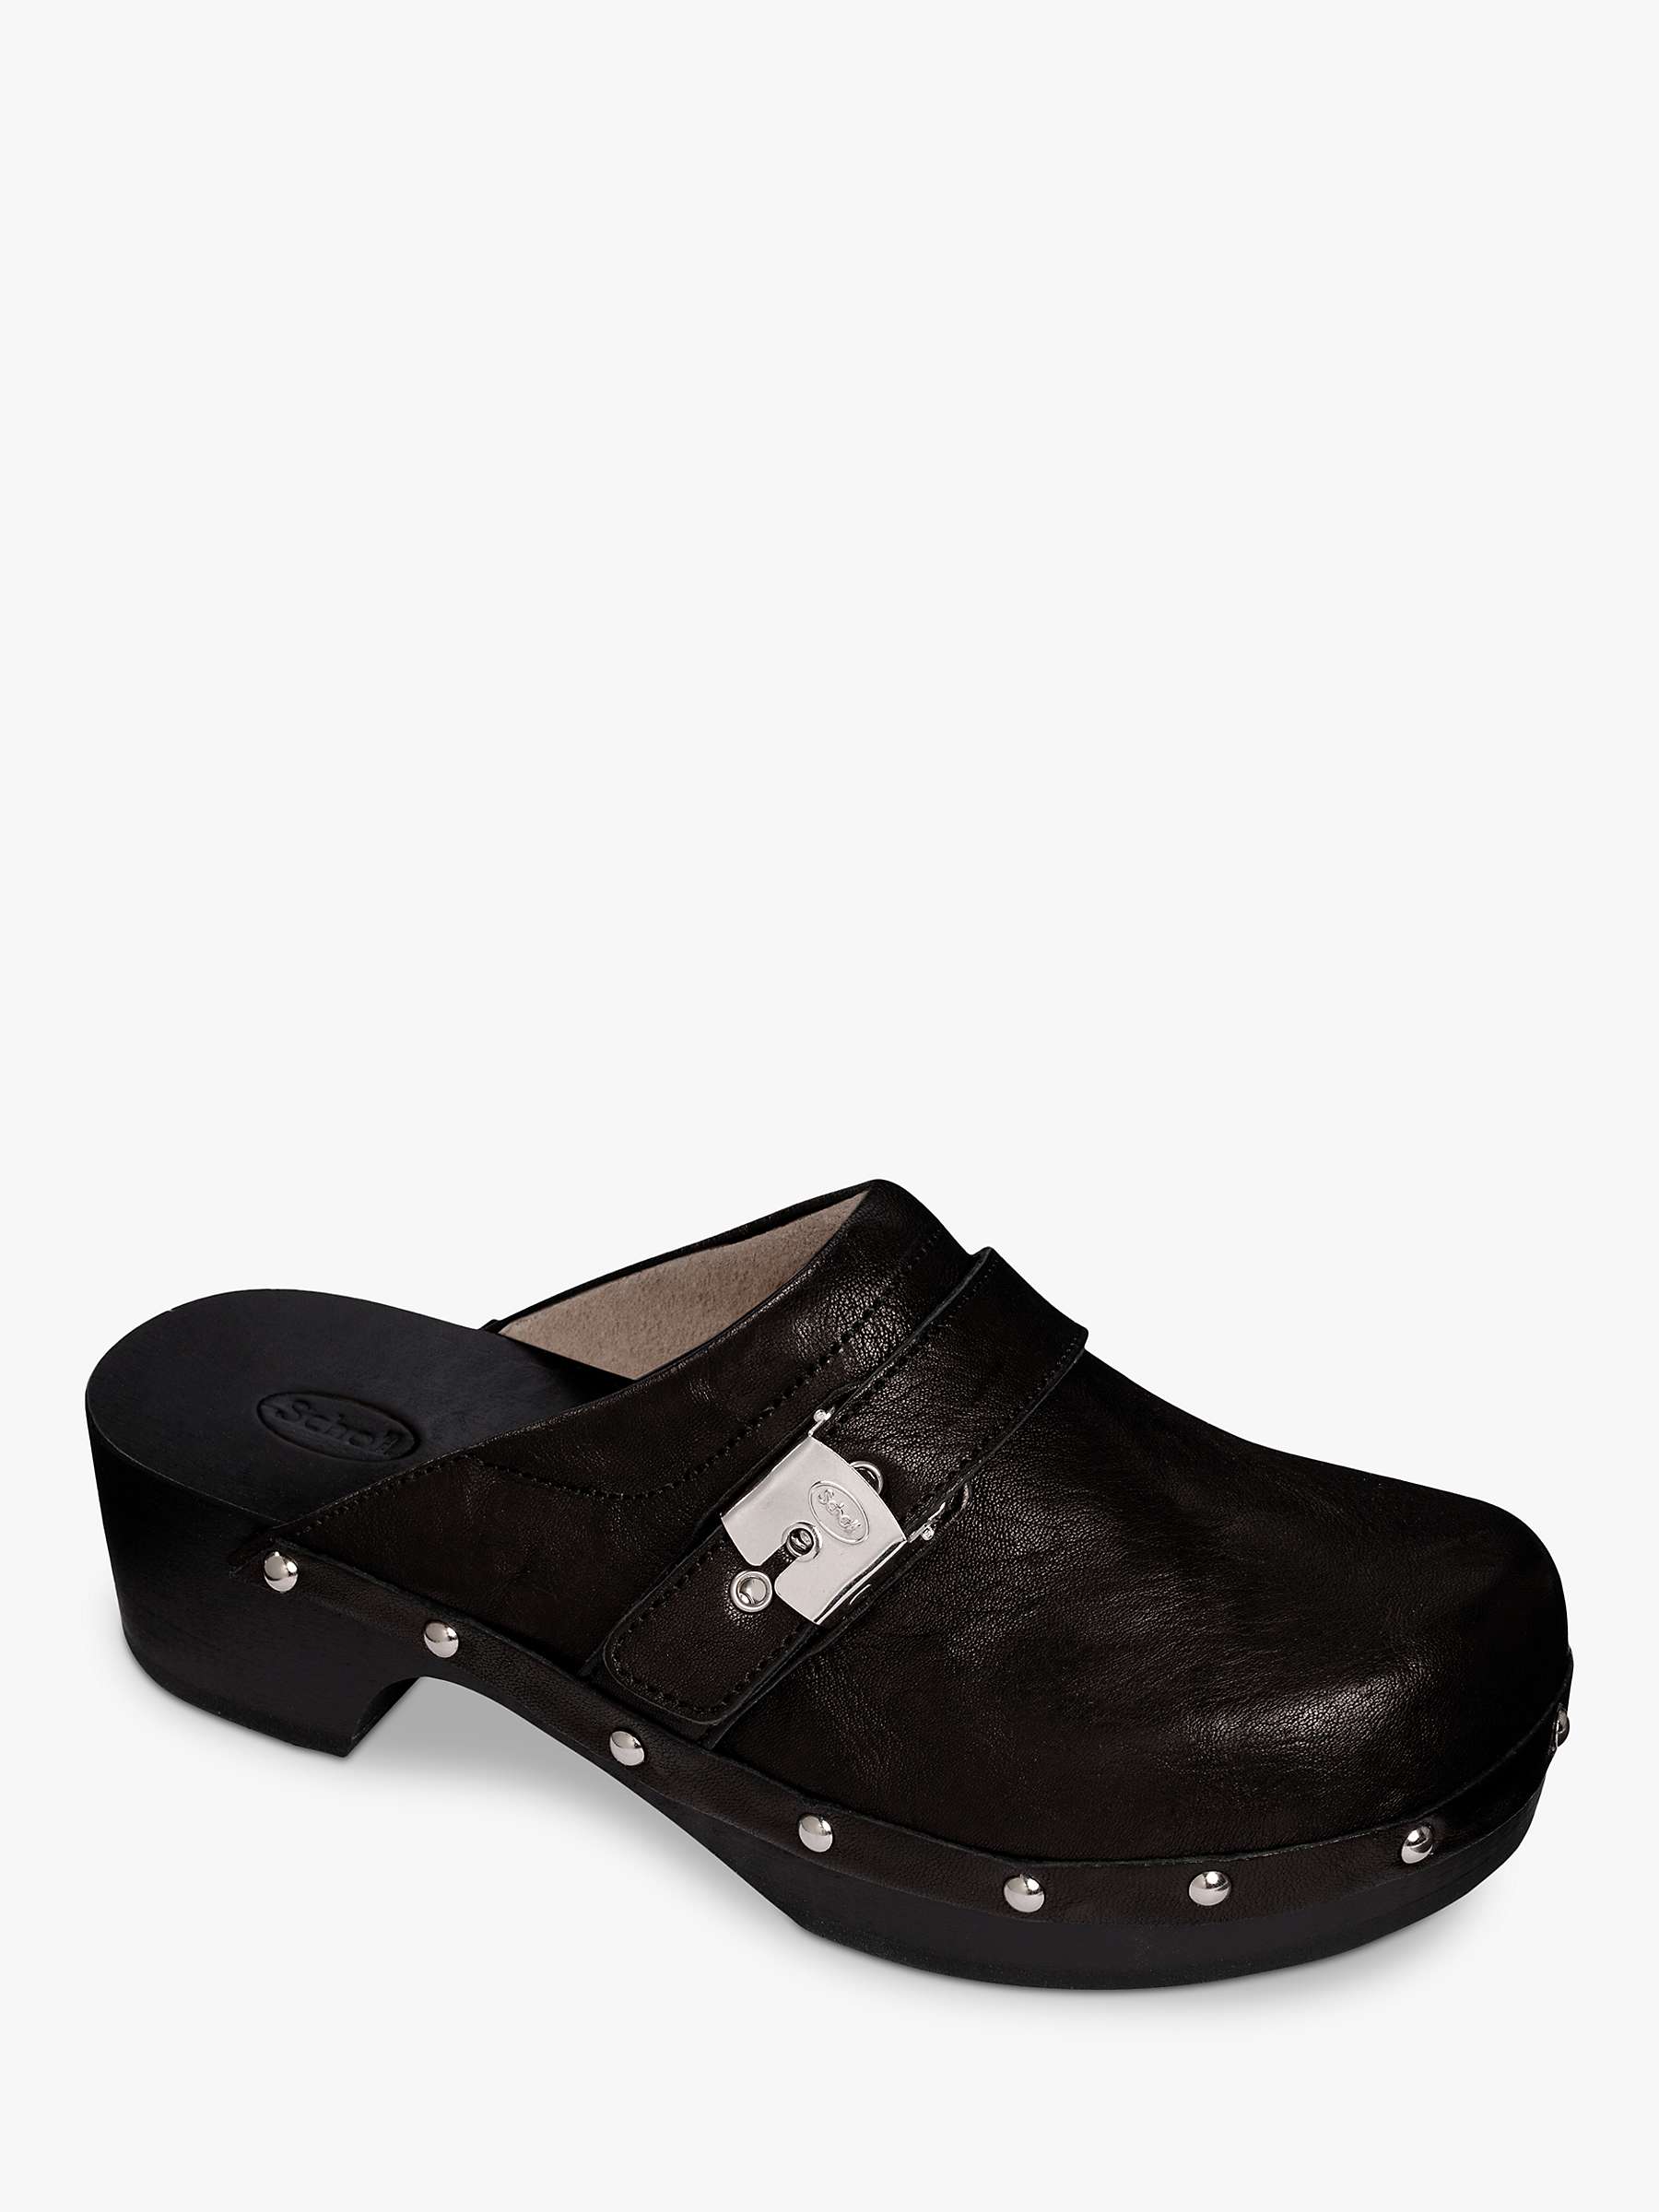 Buy Scholl Pescura Leather & Wood Clog Online at johnlewis.com